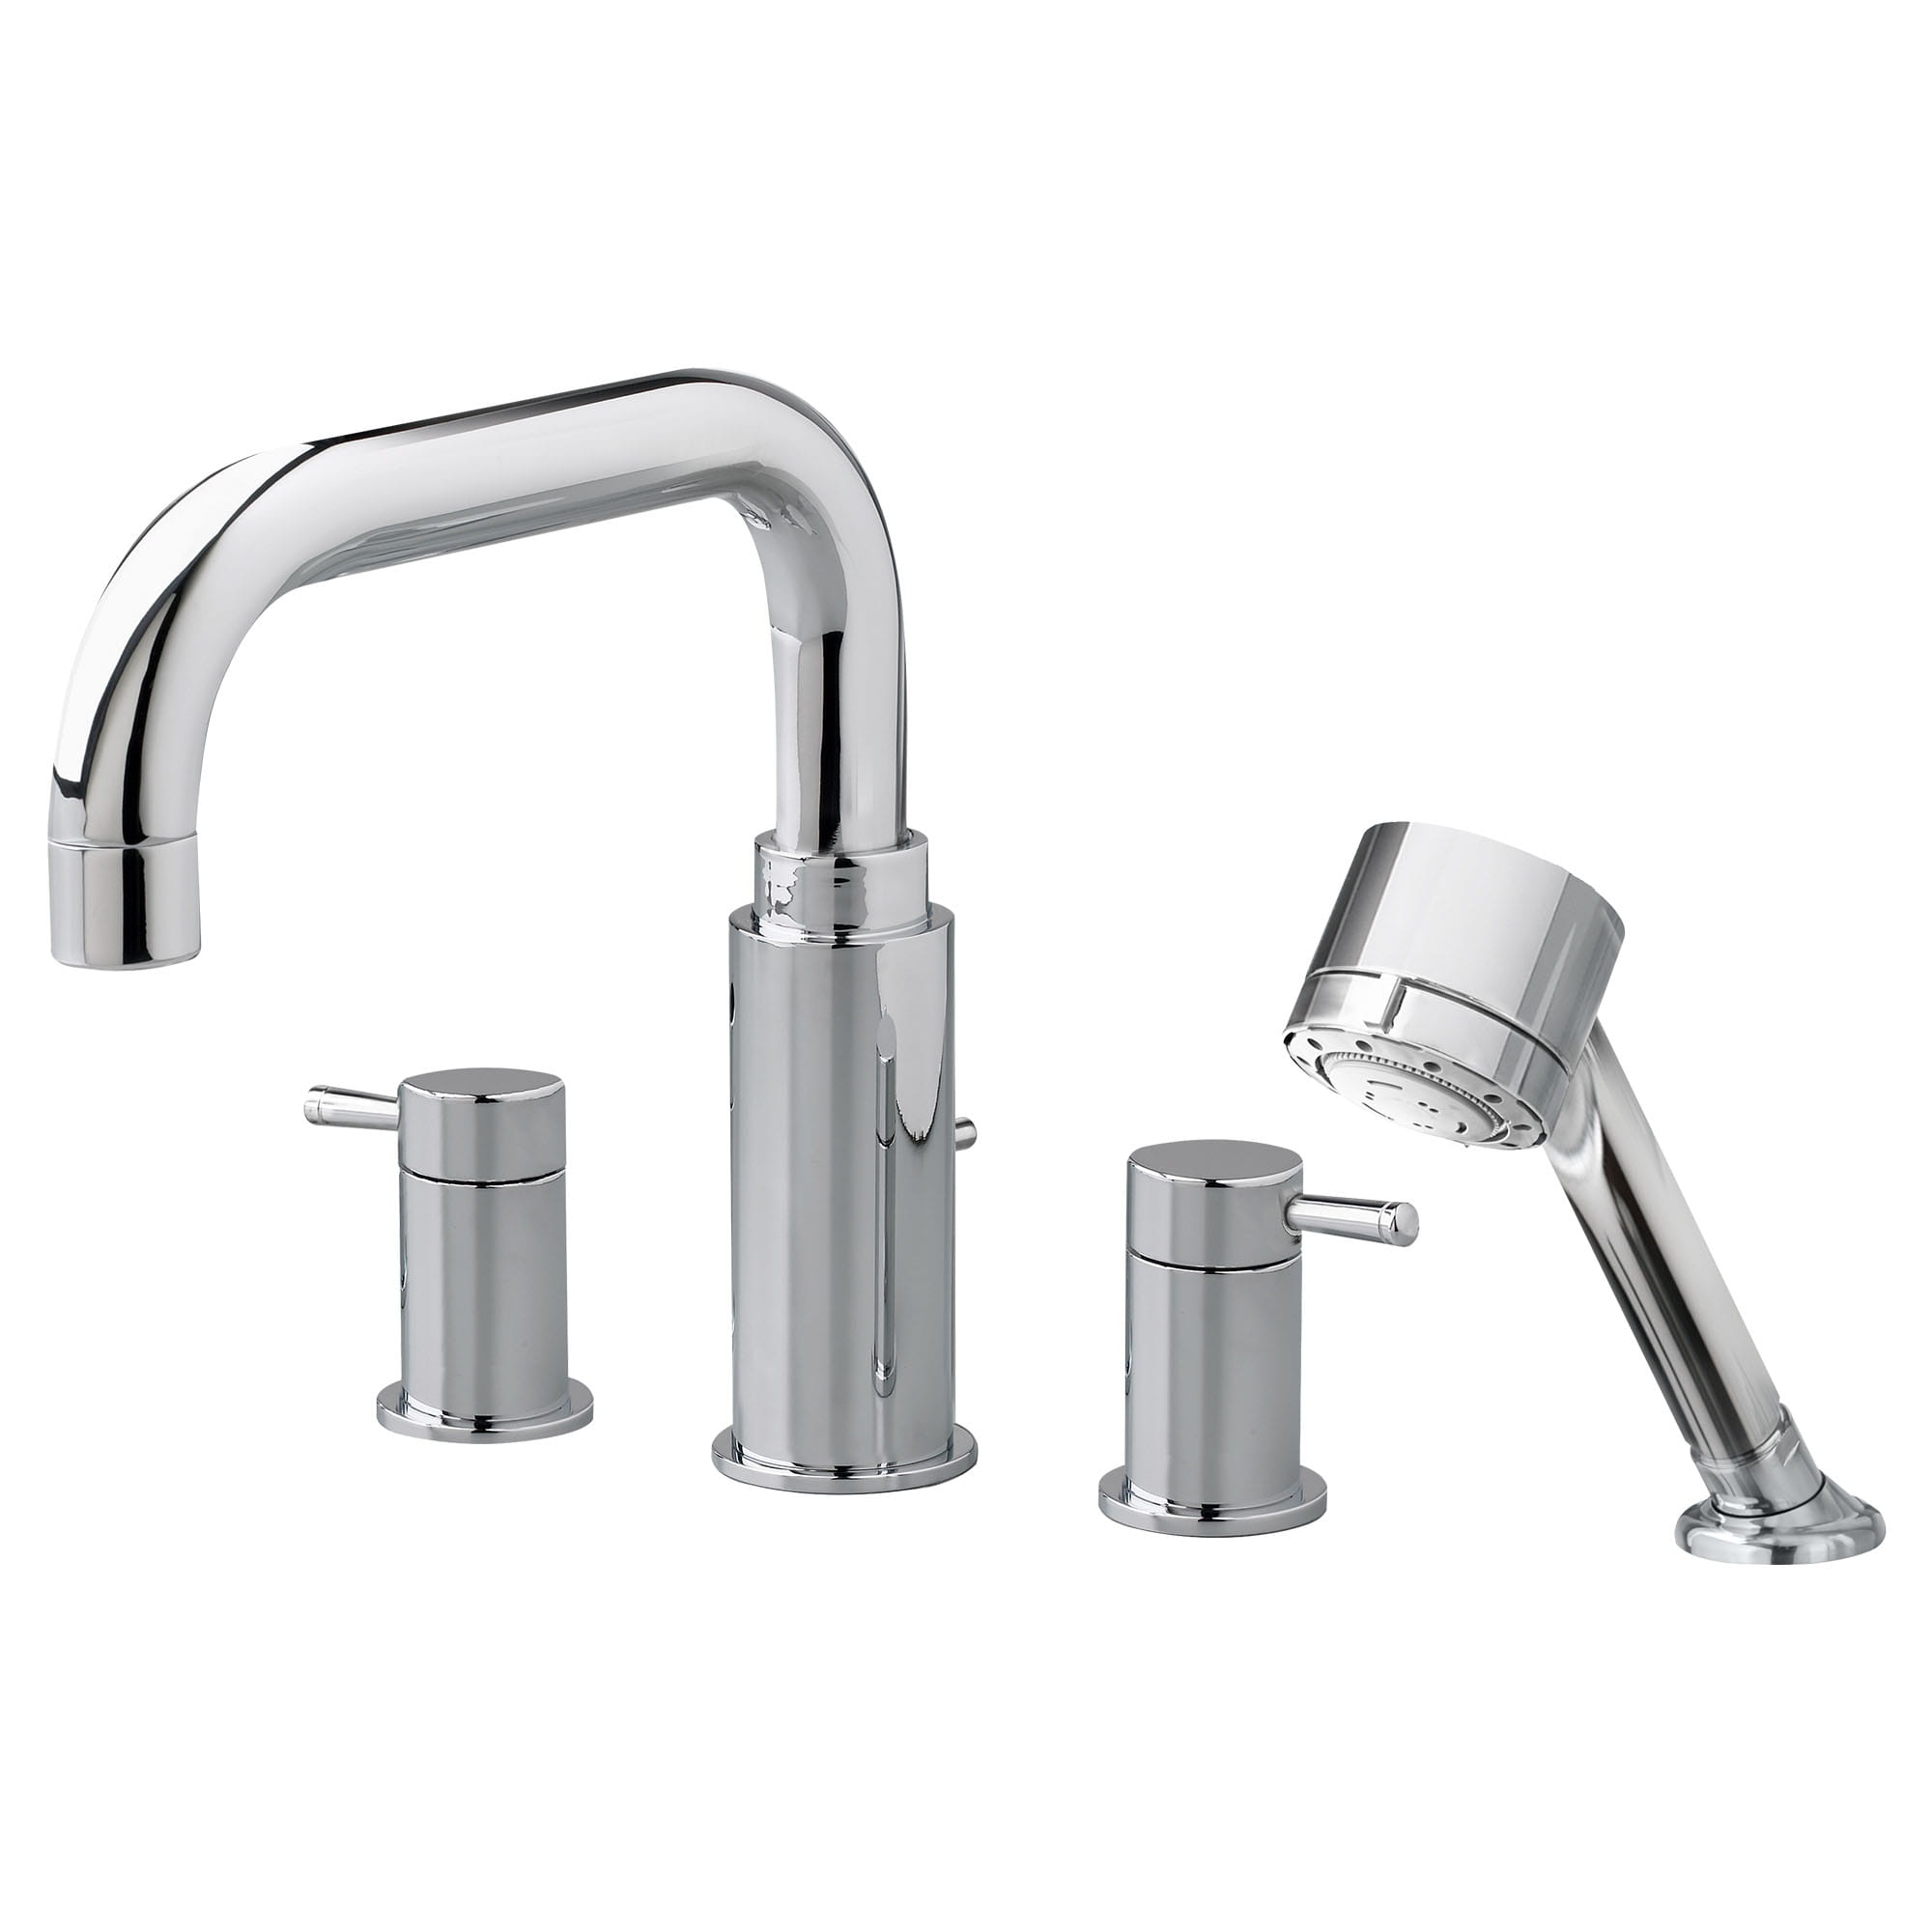 Serin Bathtub Faucet With Lever Handles and Personal Shower for Flash Rough In Valve CHROME